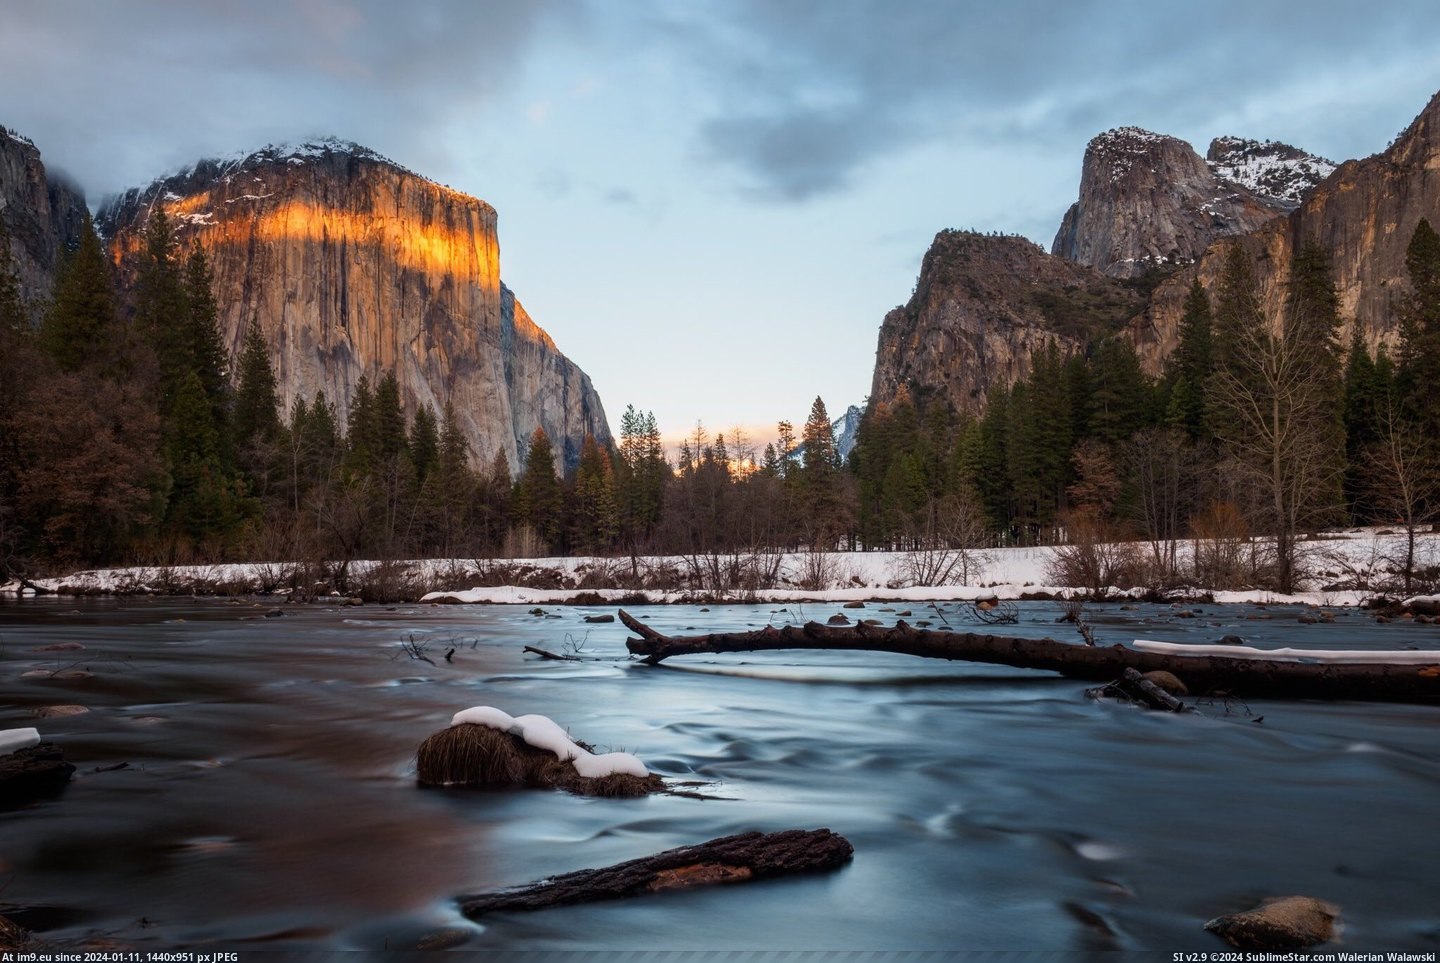 [Earthporn] The majestic view of Valley View at Yosemite in winter  [9216x6912] (in My r/EARTHPORN favs)